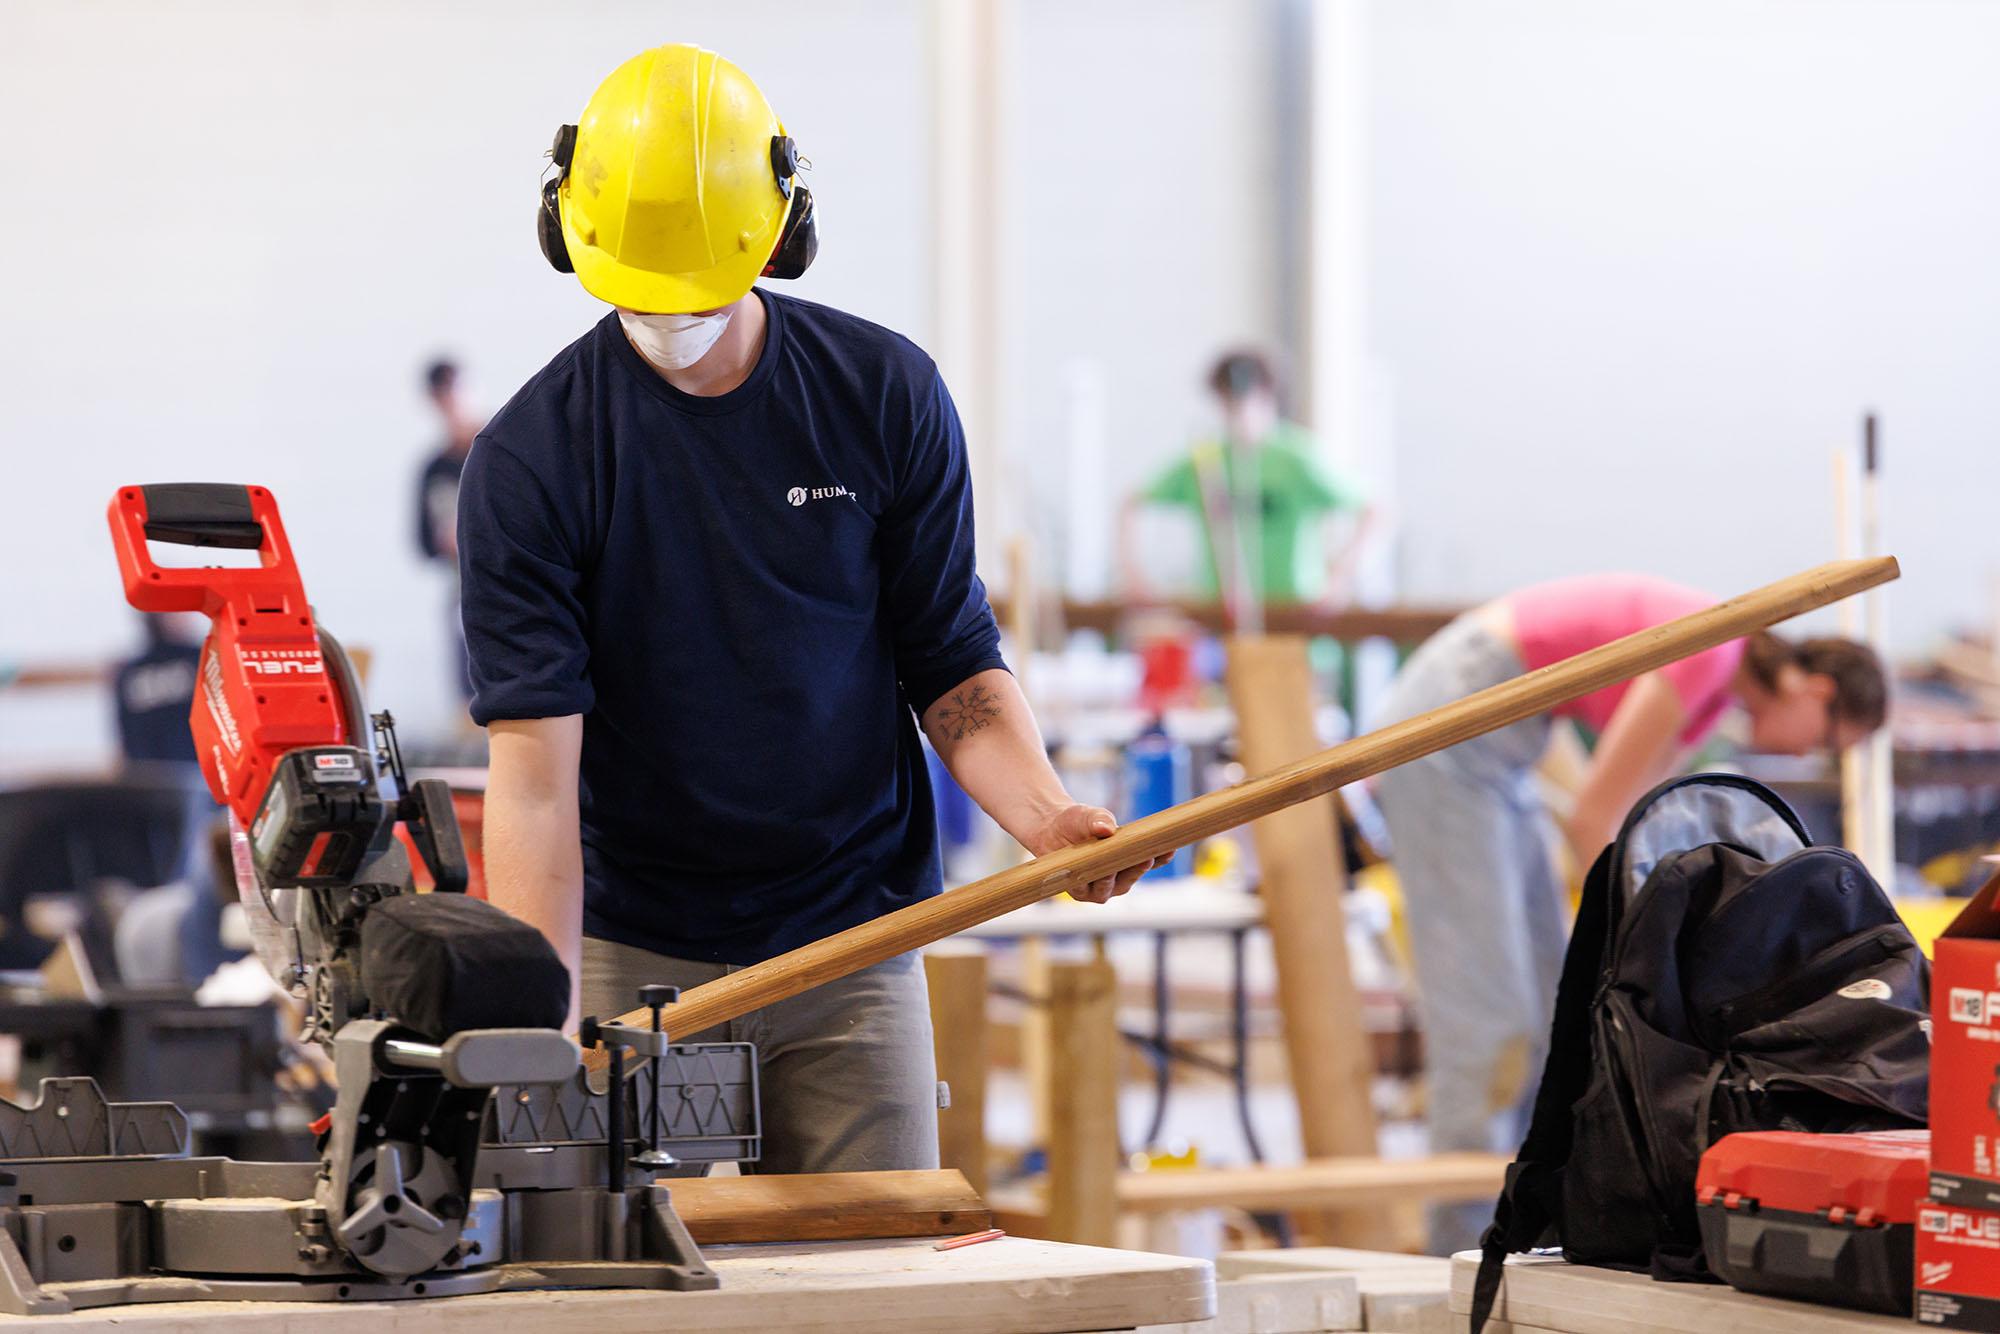 A person wearing a Humber shirt, hard hat, mask and ear protection uses a tool on a piece of wood. 